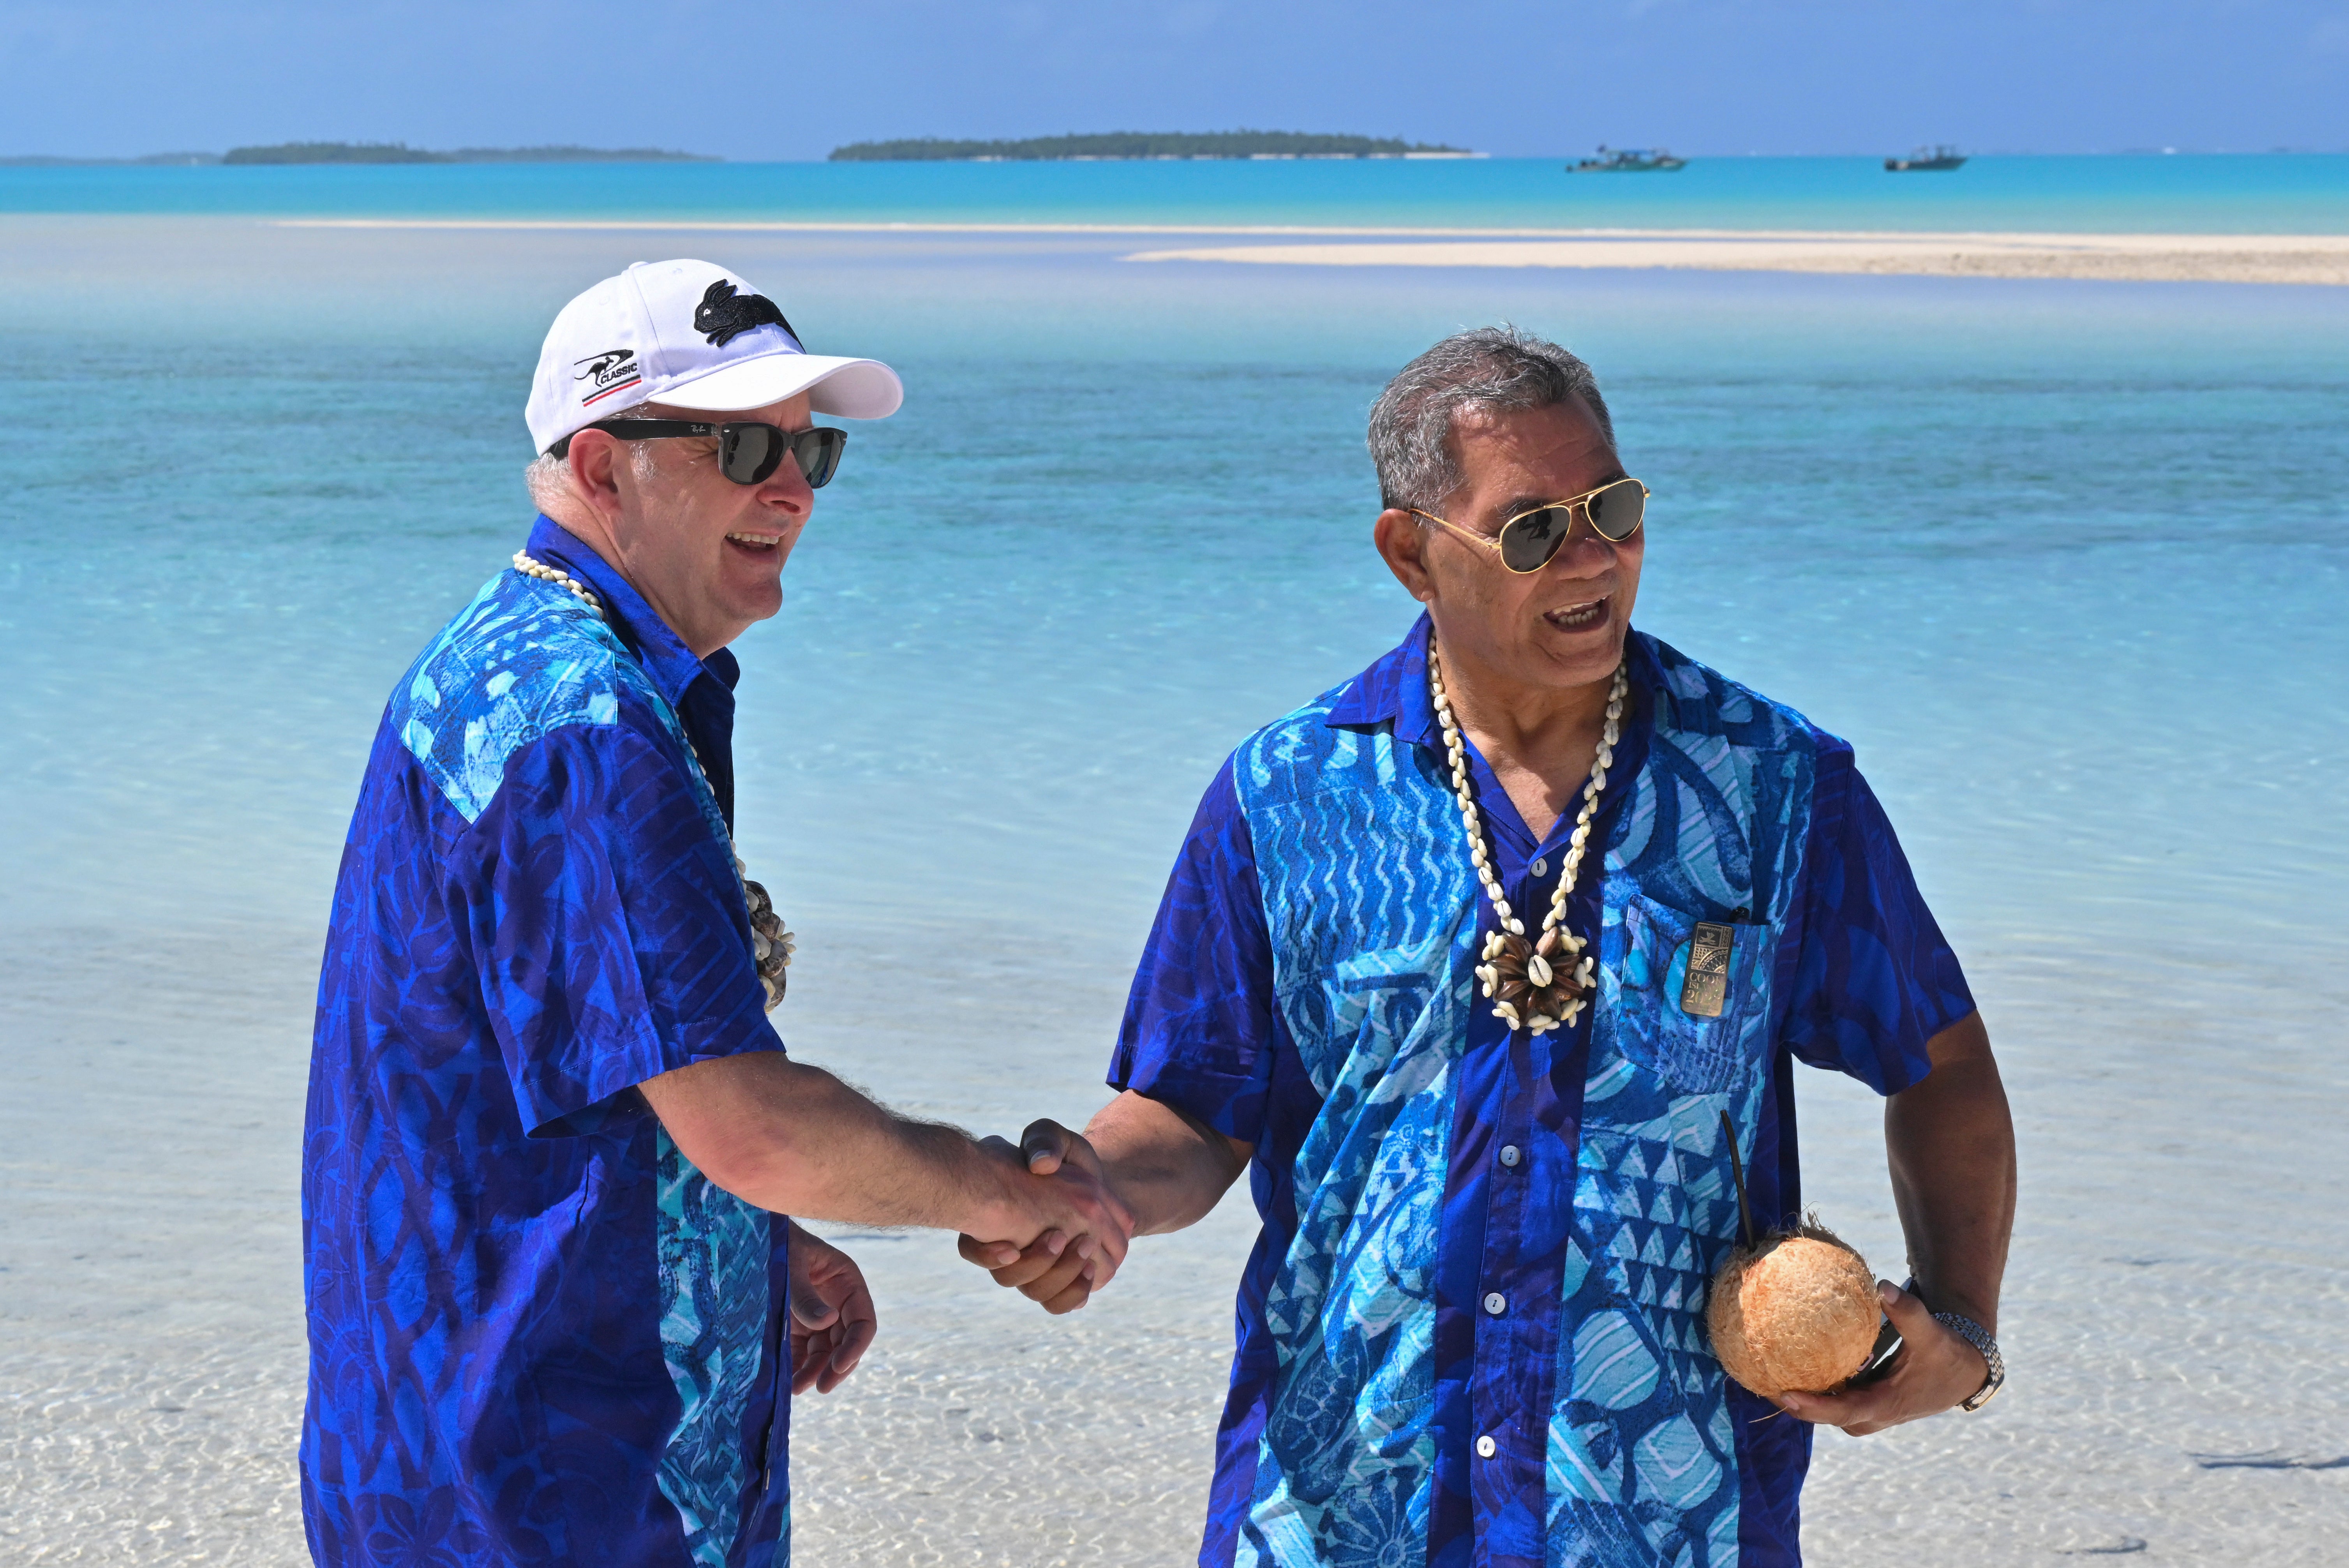 <p>Australia’s Prime Minister Anthony Albanese, left, and Tuvalu’s Prime Minister Kausea shake hands on One Foot Island after attending the Leaders’ Retreat during the Pacific Islands Forum in Aitutaki, Cook Islands</p>